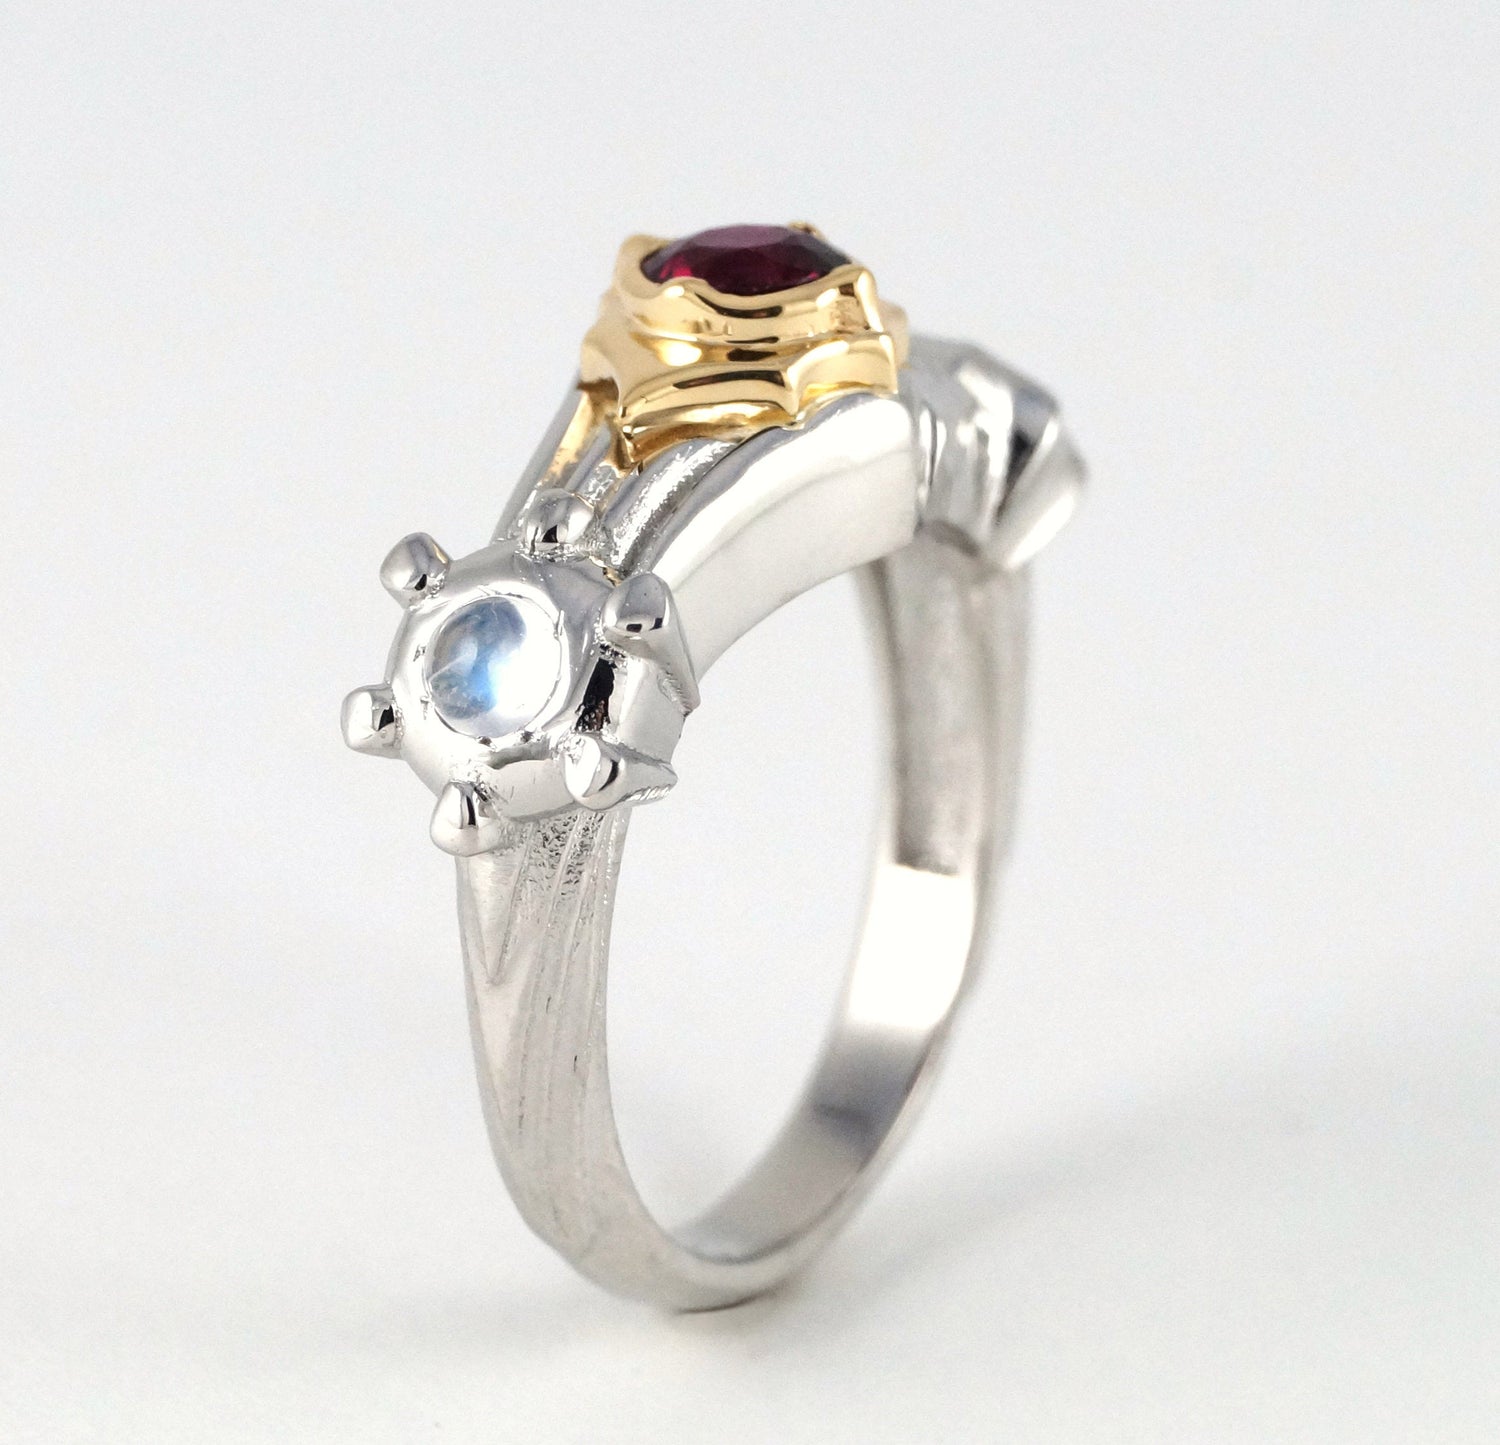 Pokemon Ring Sun and Moon Pearl Diamond and Platinum Version Featuring Garnet Moonstone Diamond or CZ Engagement Ring Two Tone Gold 262